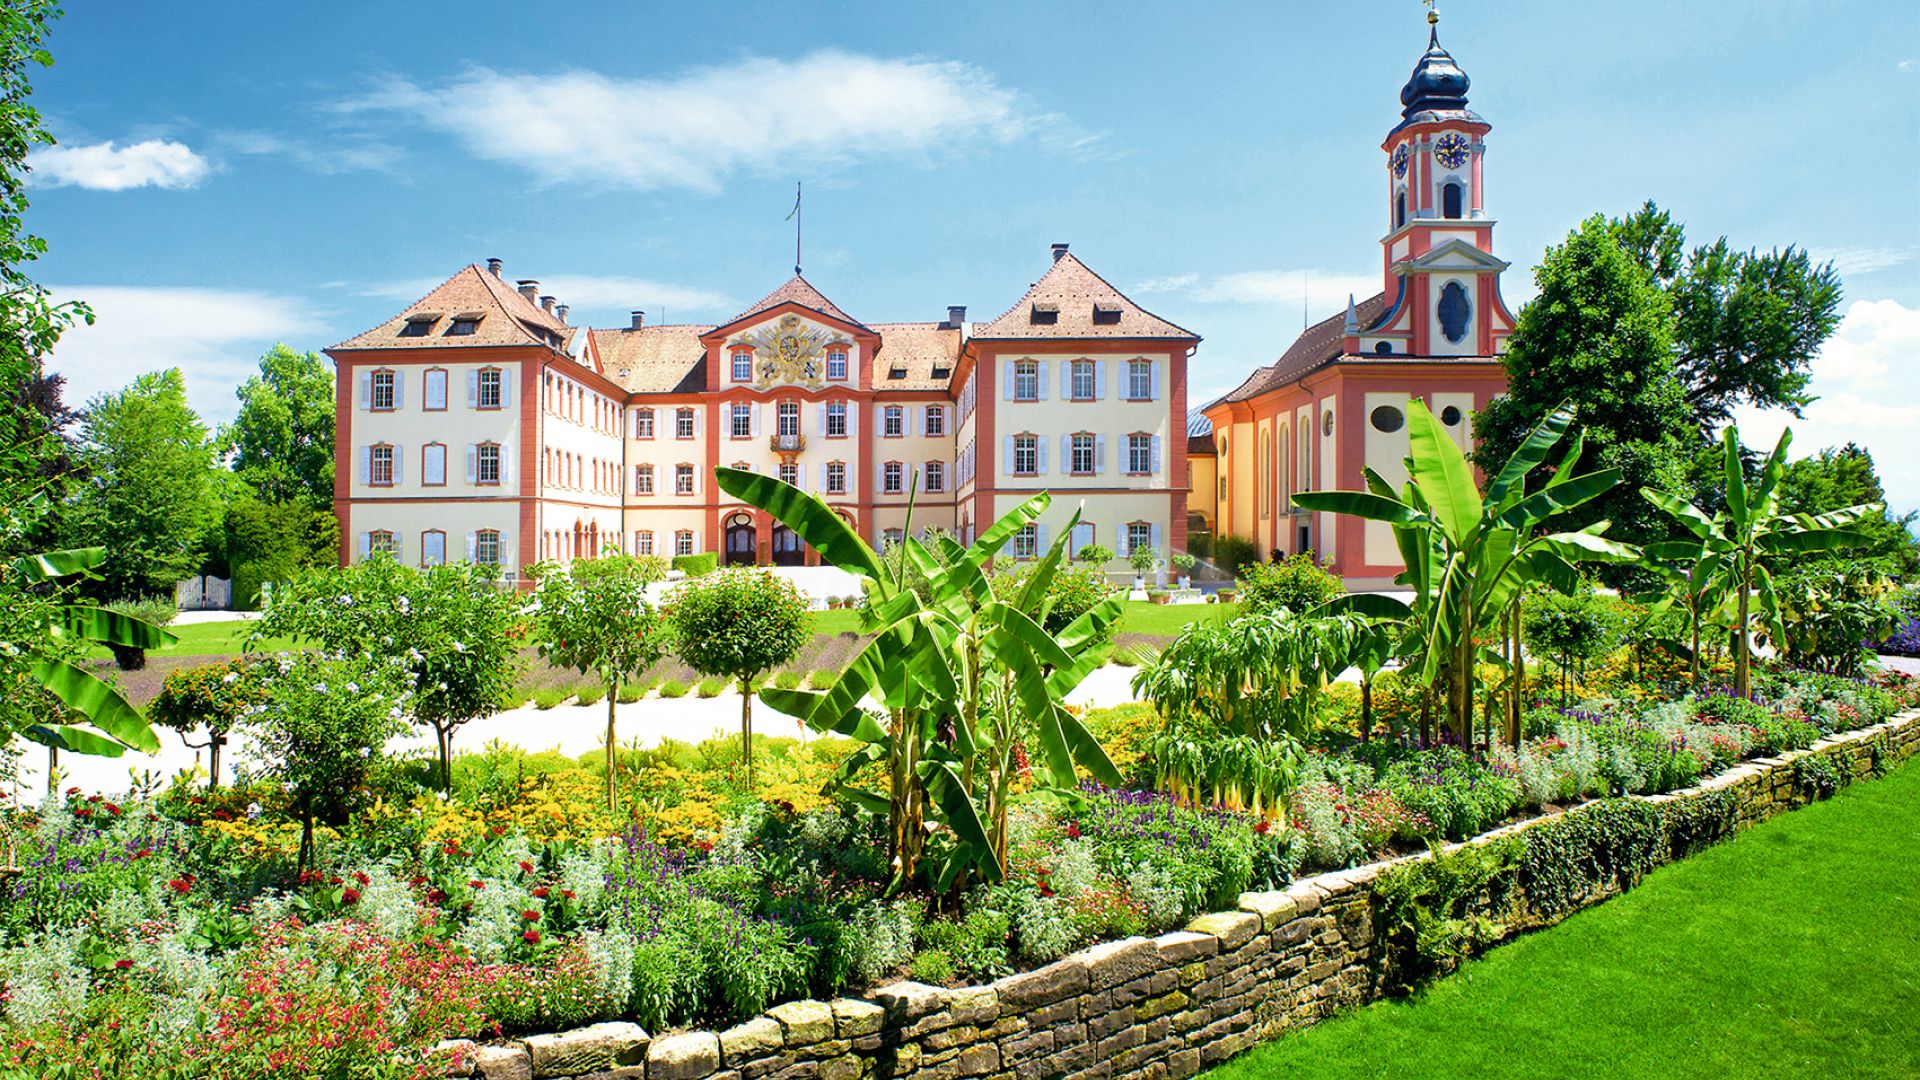 Island of Mainau: The Palace of the Teutonic Order with church